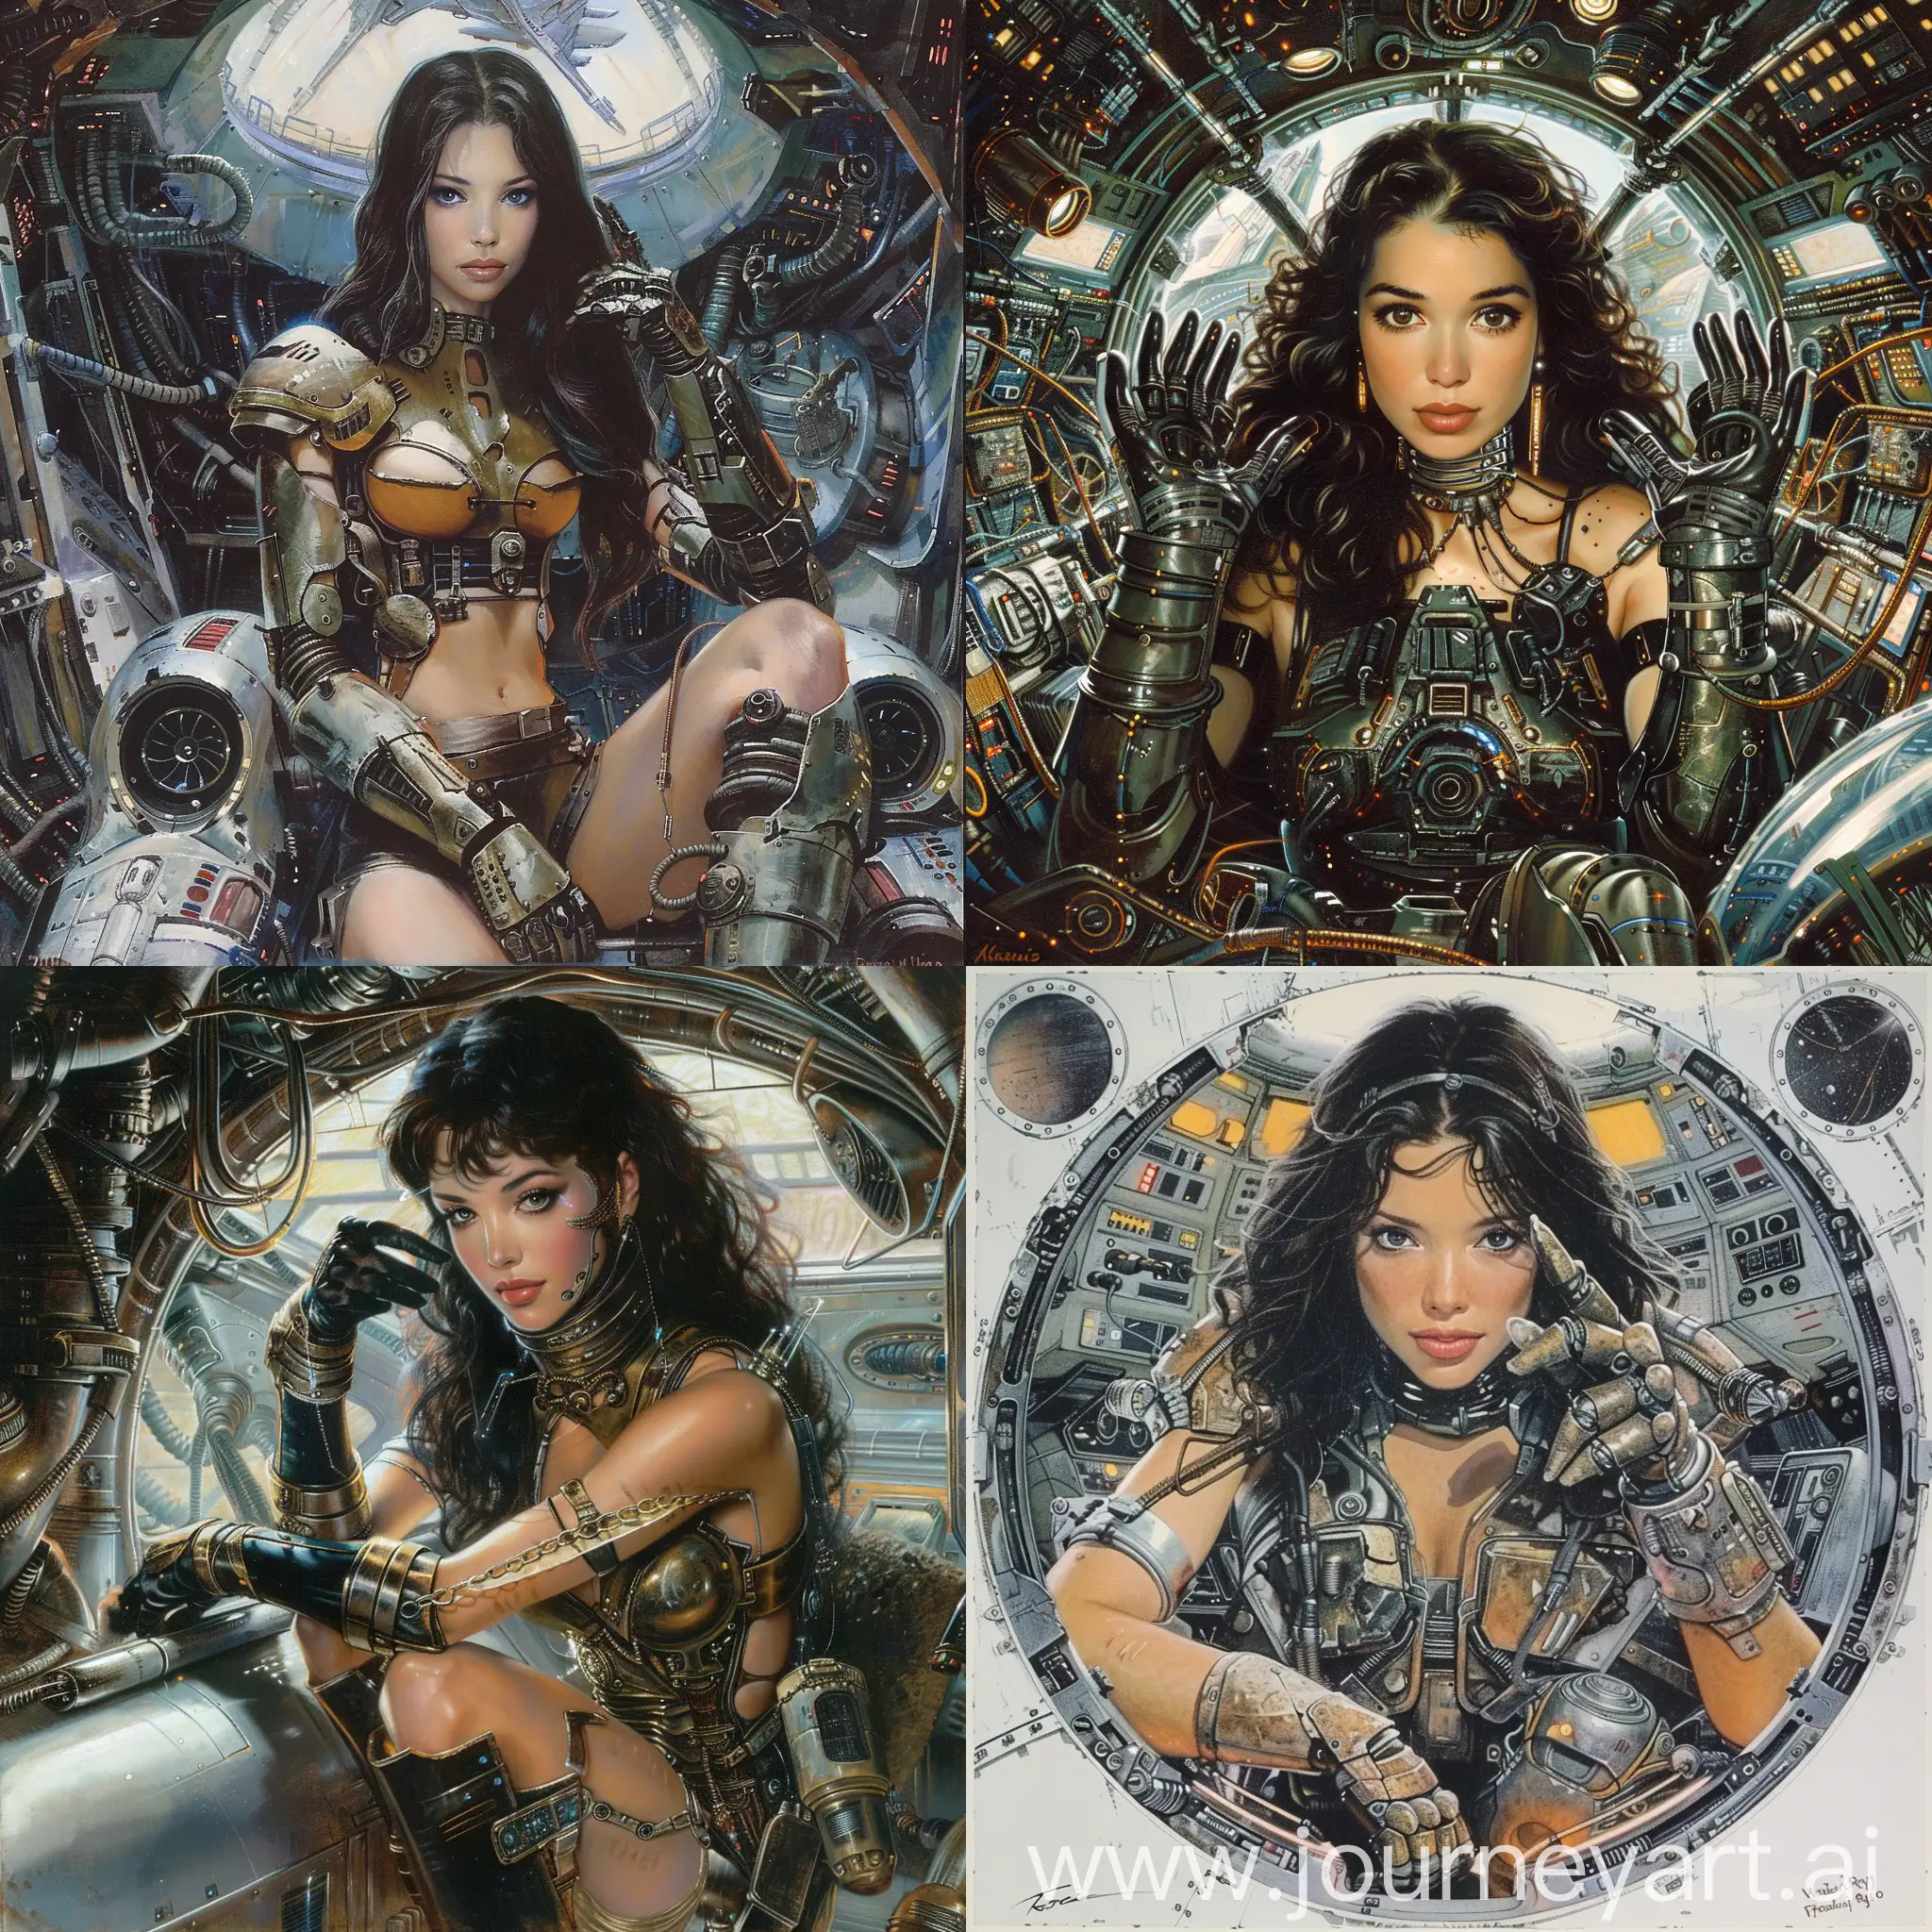 (luis royo):0.5 front View Portrait of Beautiful Buxom Dark Haired cyberMaid Wearing Gloves with armor and boots, Spaceship Interior cybermechanism and droids, Matte Painting, Mysterious, multicolor, ultradetailing, art of fantasy artists Boris Vallejo, Carne Griffiths, Wadim Kashin, and Frazetta